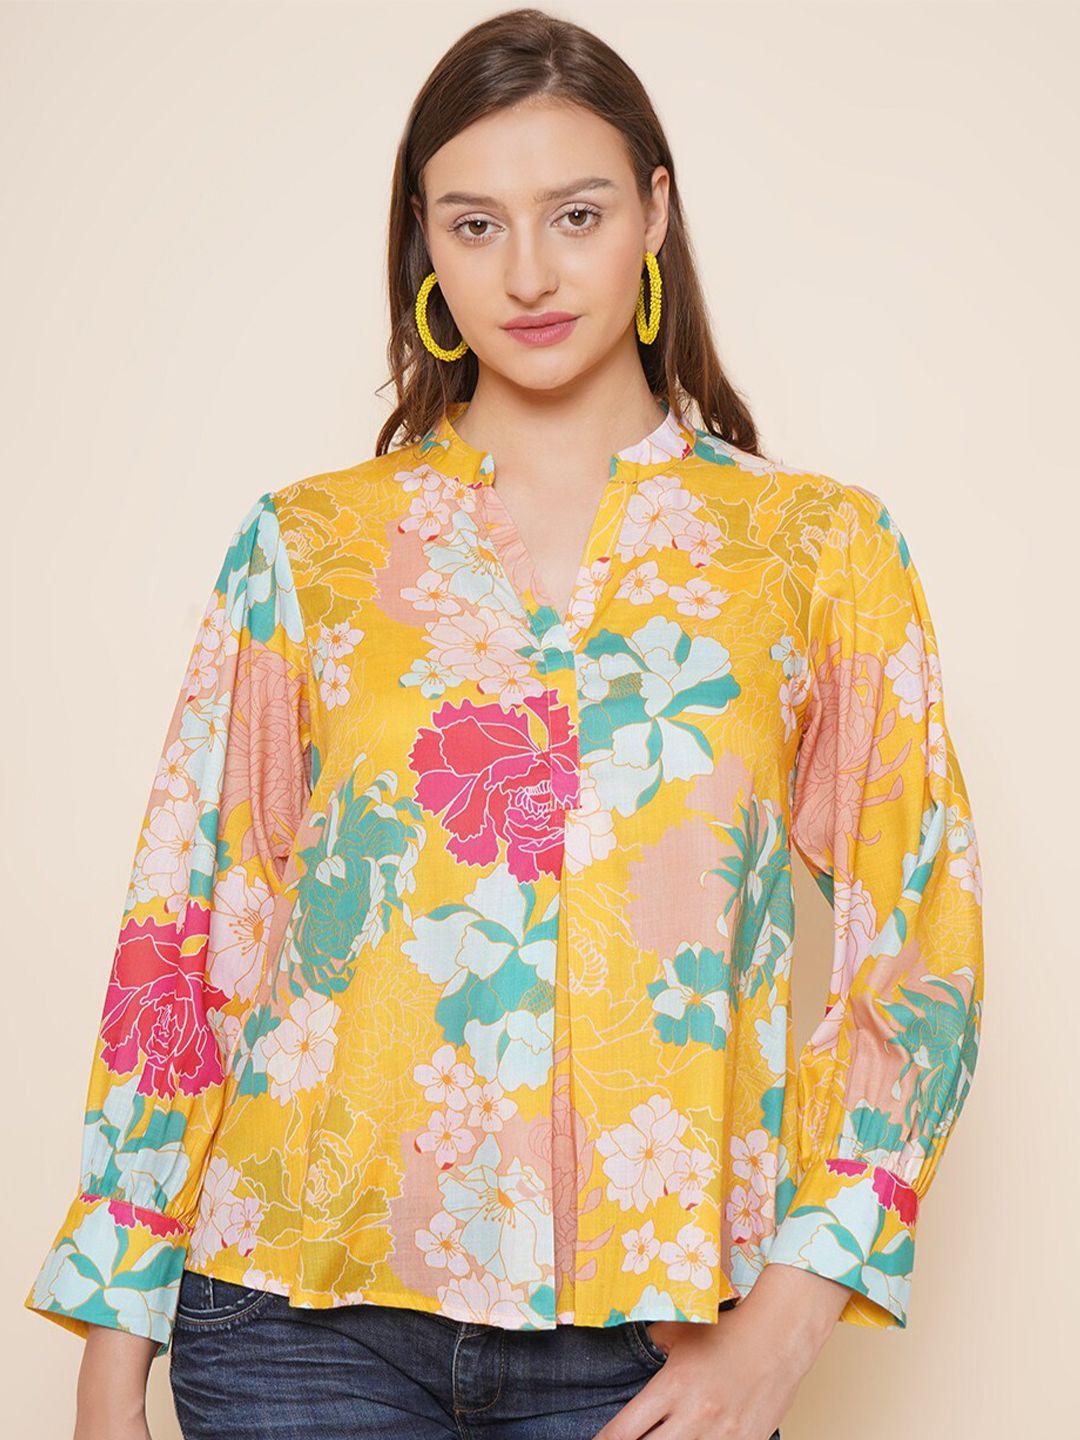 bhama-couture-floral-printed-cuffed-sleeves-mandarin-collar-top